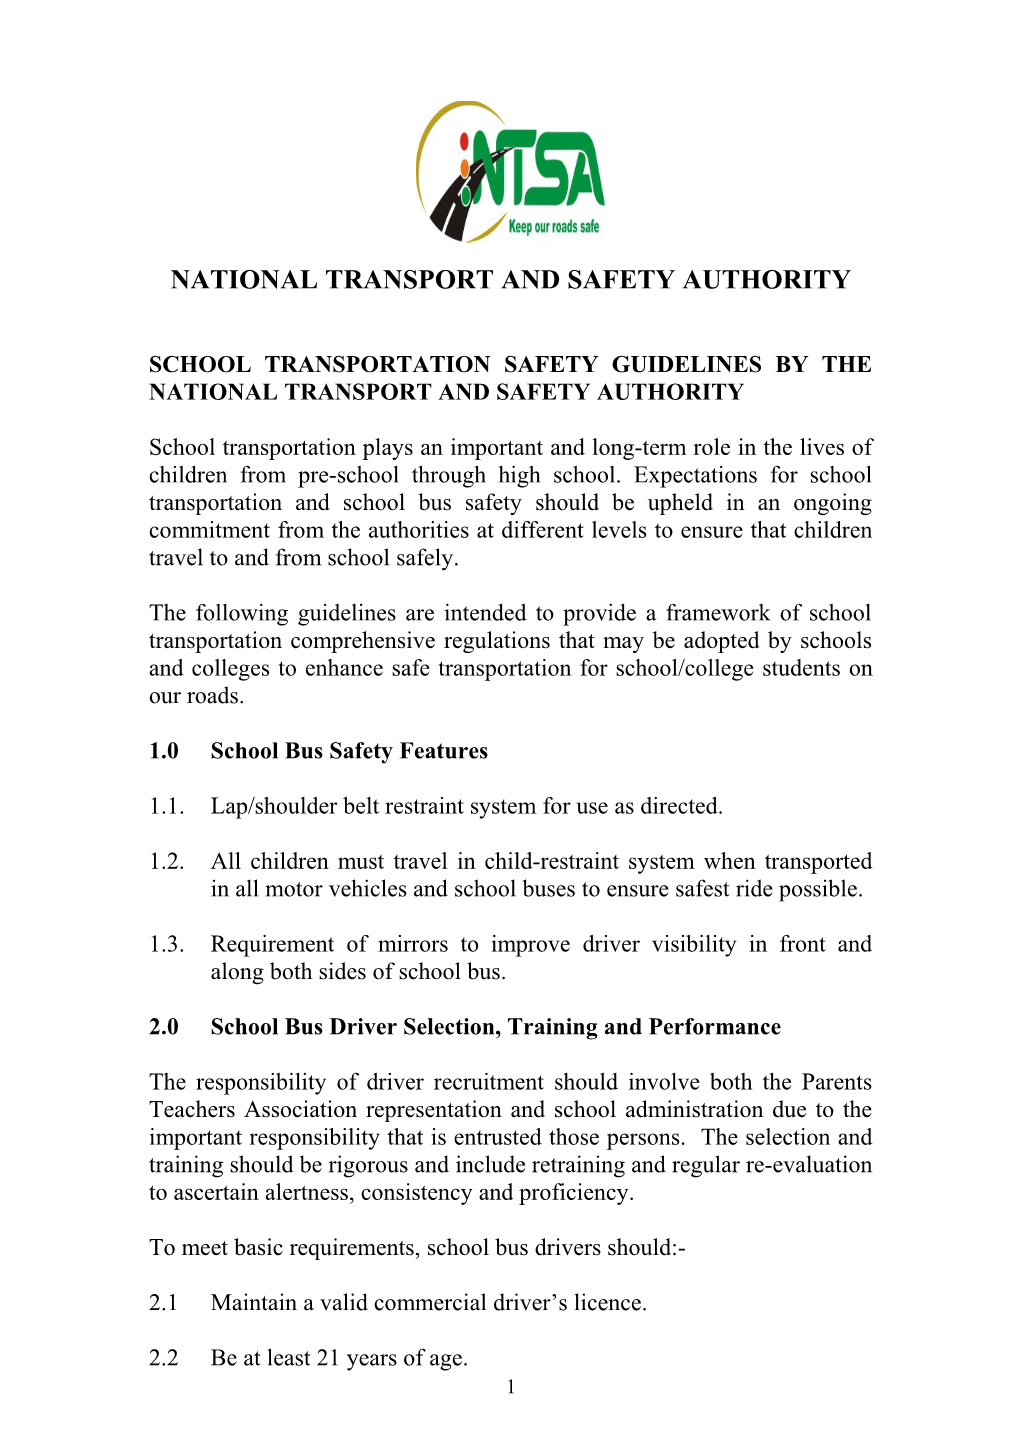 National Transport and Safety Authority